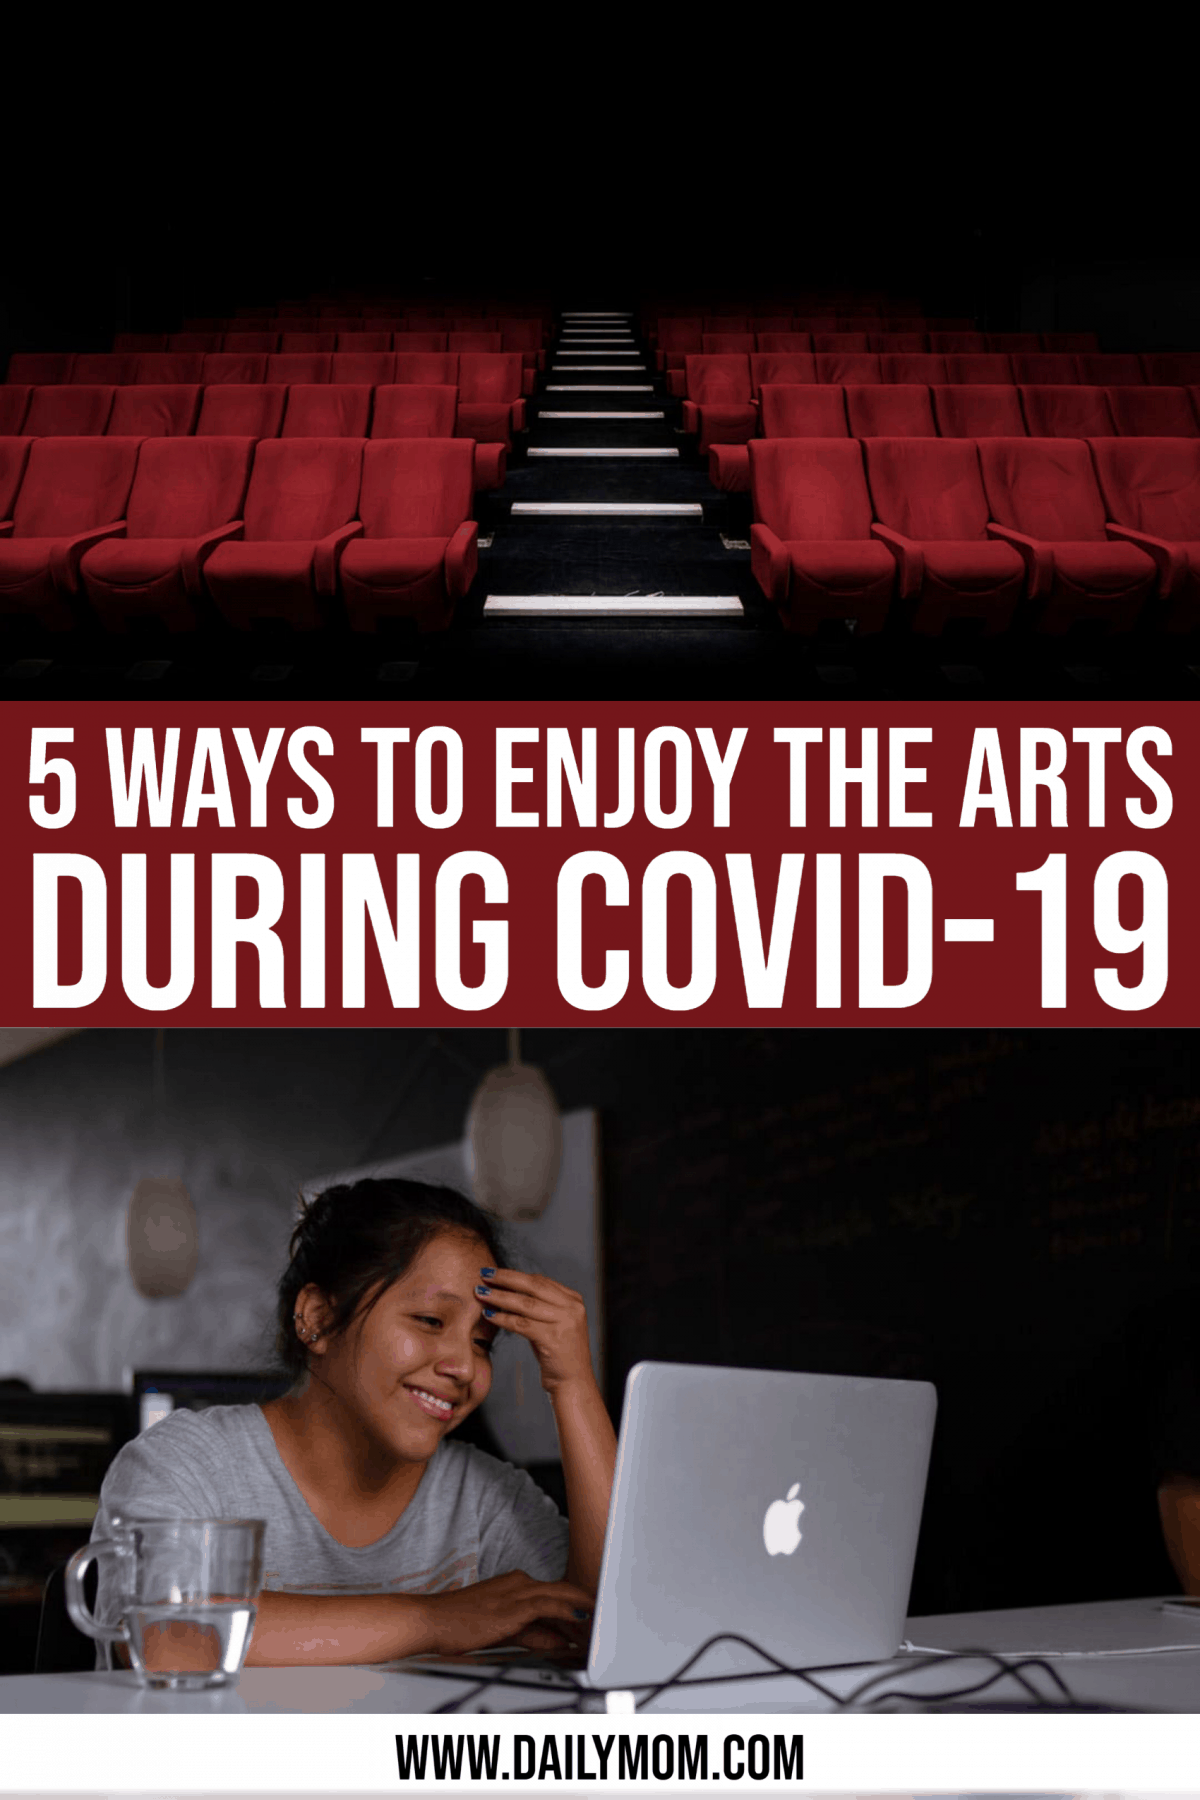 5 Ways To Experience Fine Arts Via Online Entertainment (For Free)